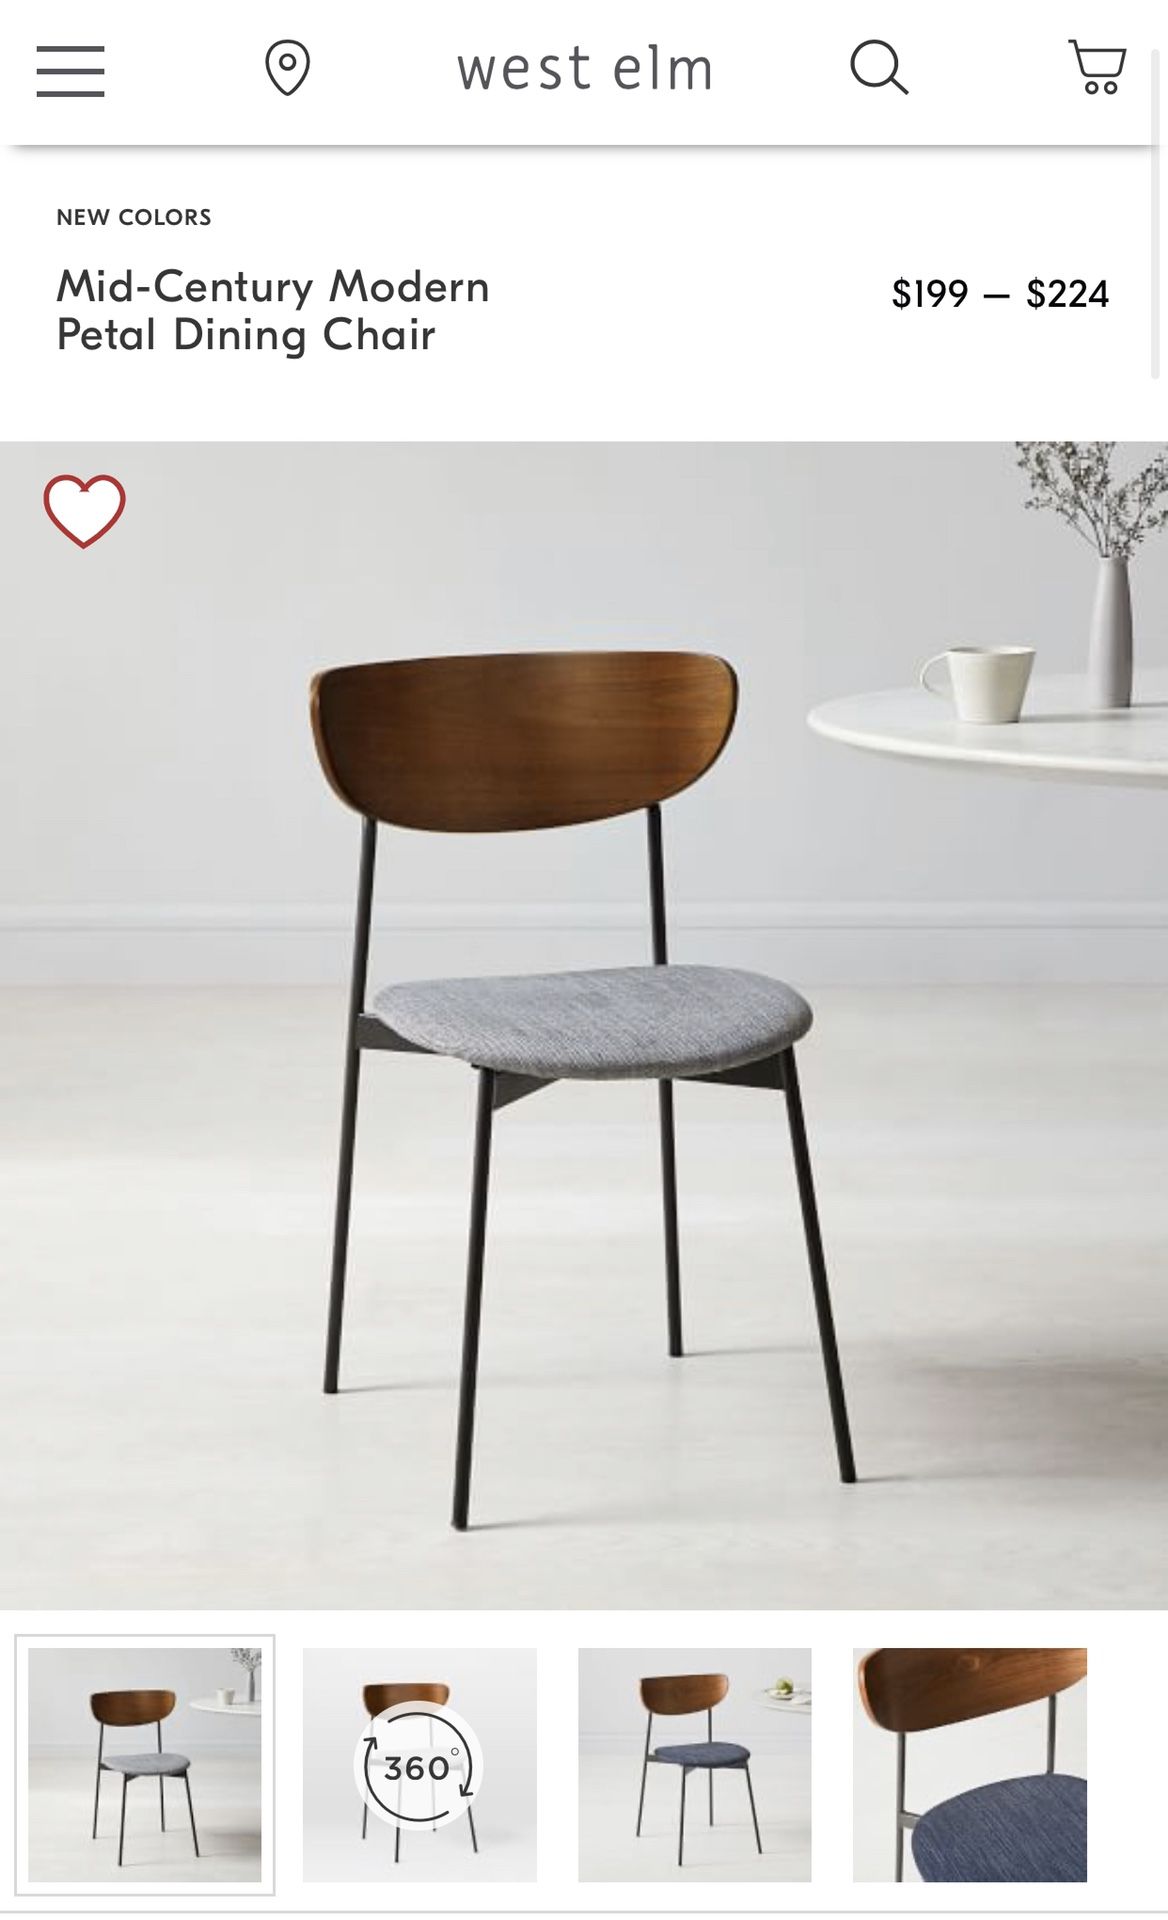 Dining chairs West elm